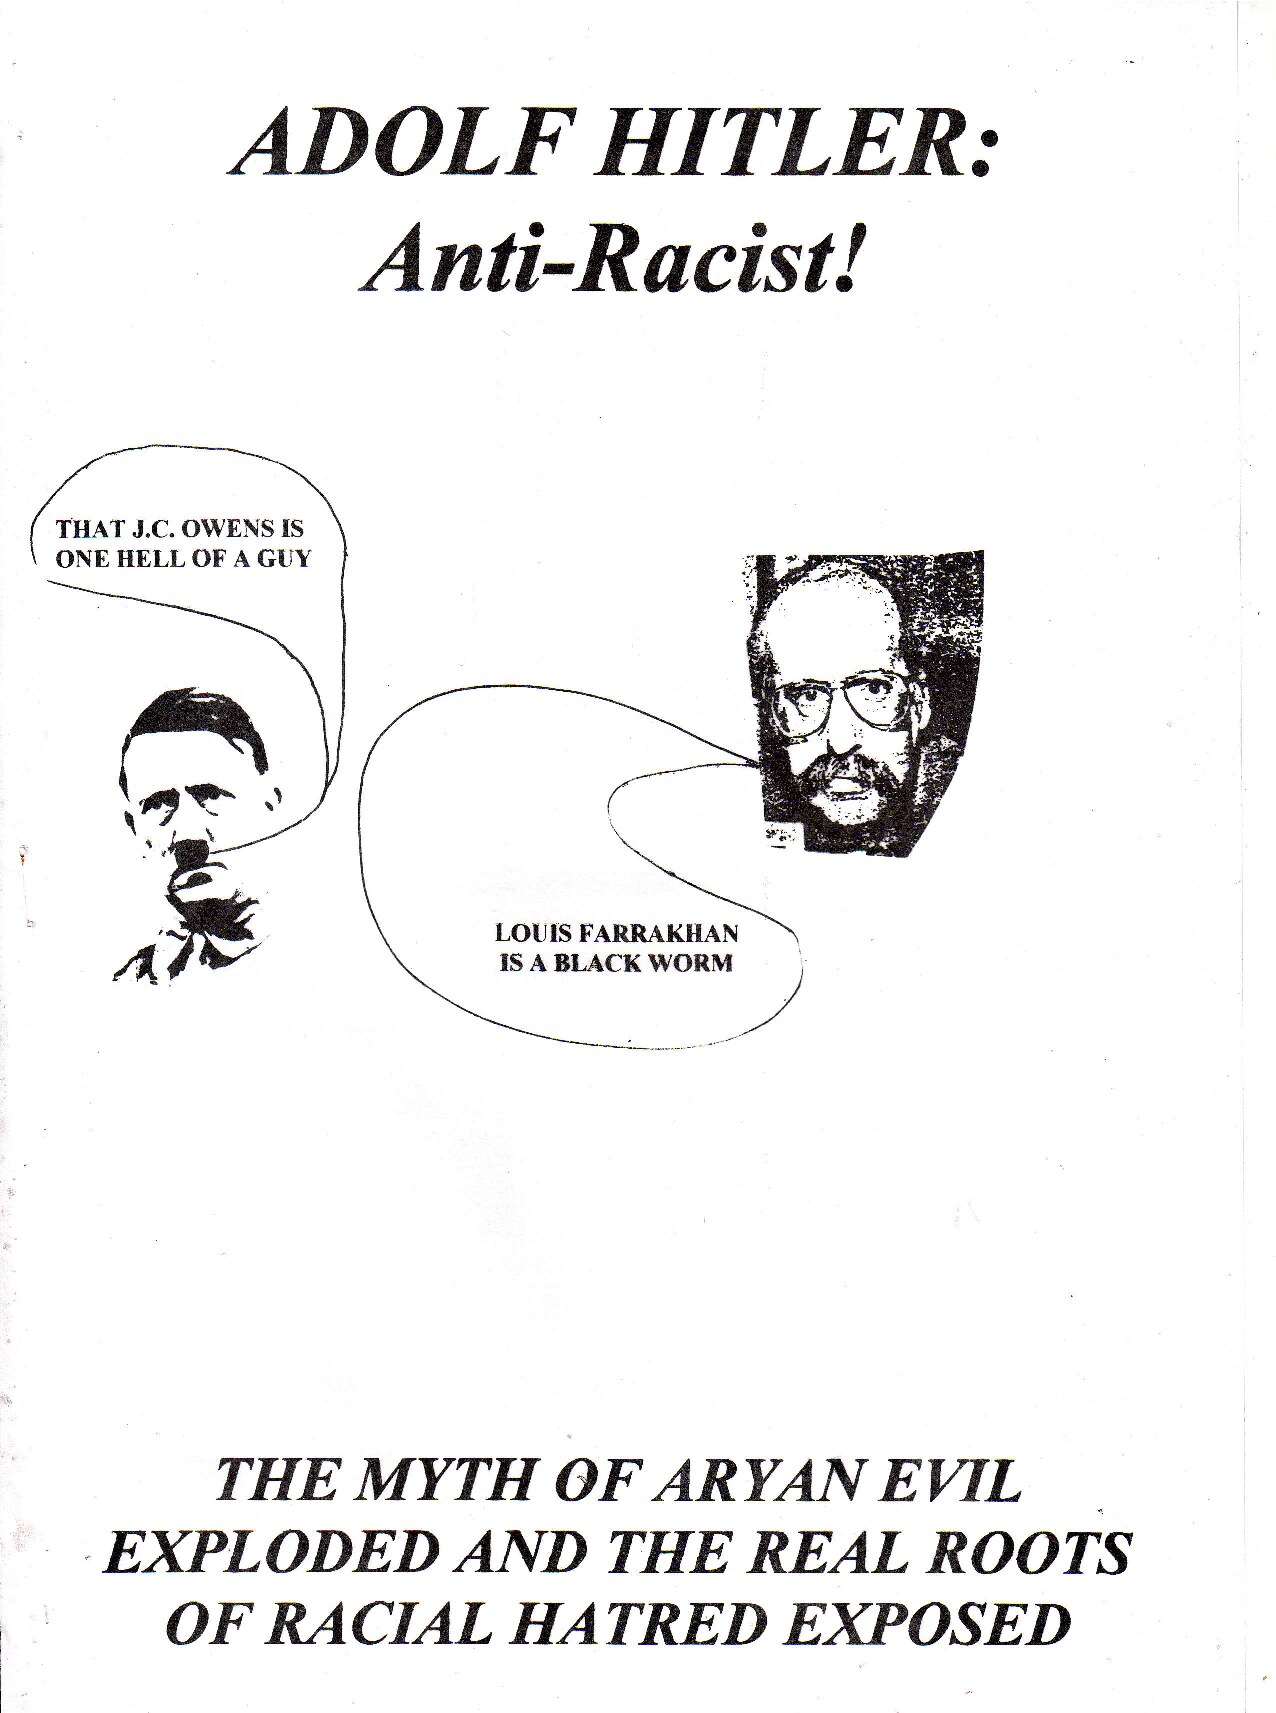 Baron, Alexander; Adolf Hitler; Anti-Racist; The Myth of Aryan Evil Exploded and the Real Roots of Racial Hatred Exposed